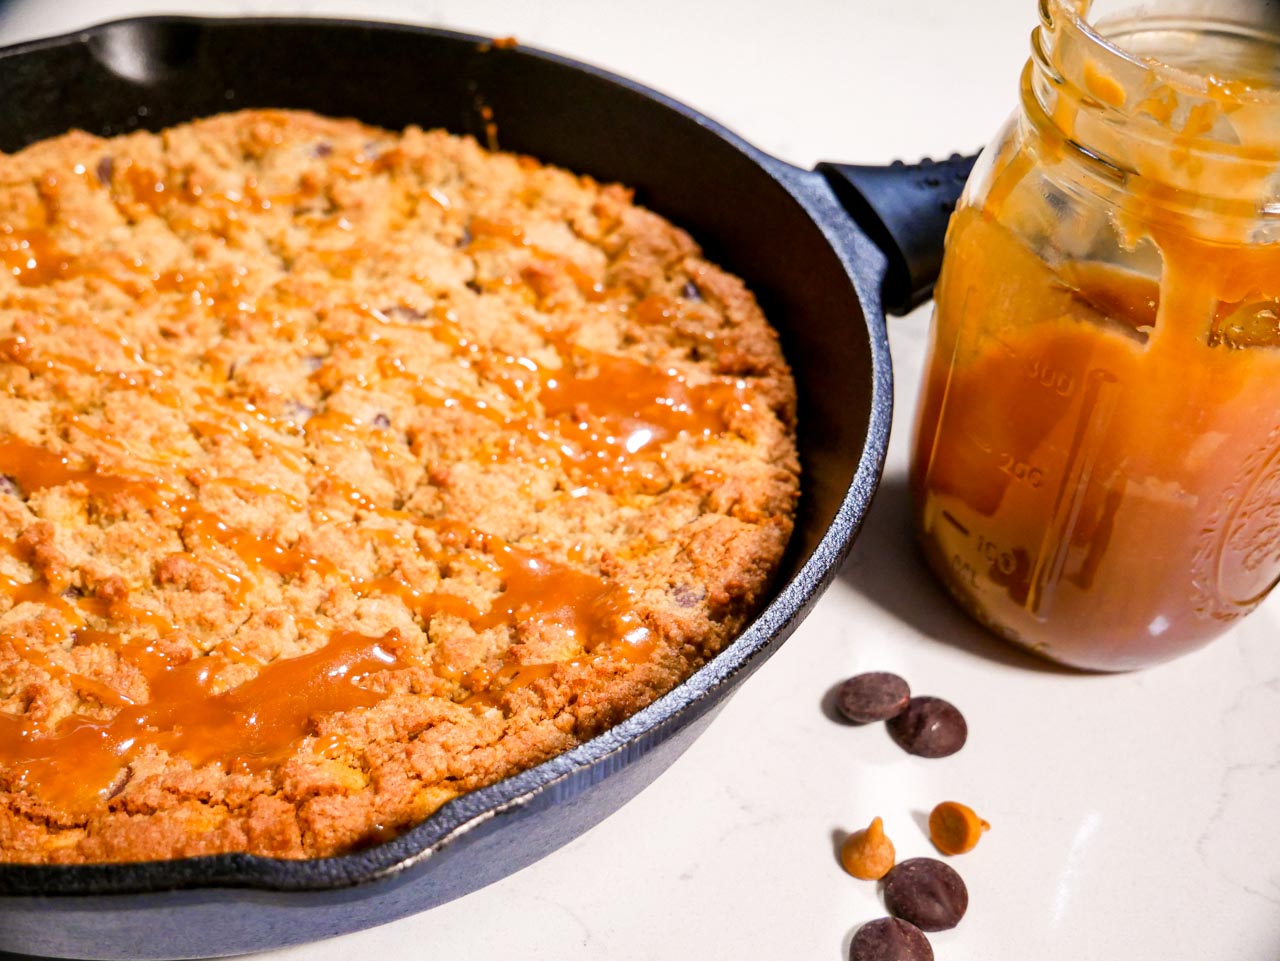 Salted Caramel Cookie Skillet with chocolate and butterscotch chips